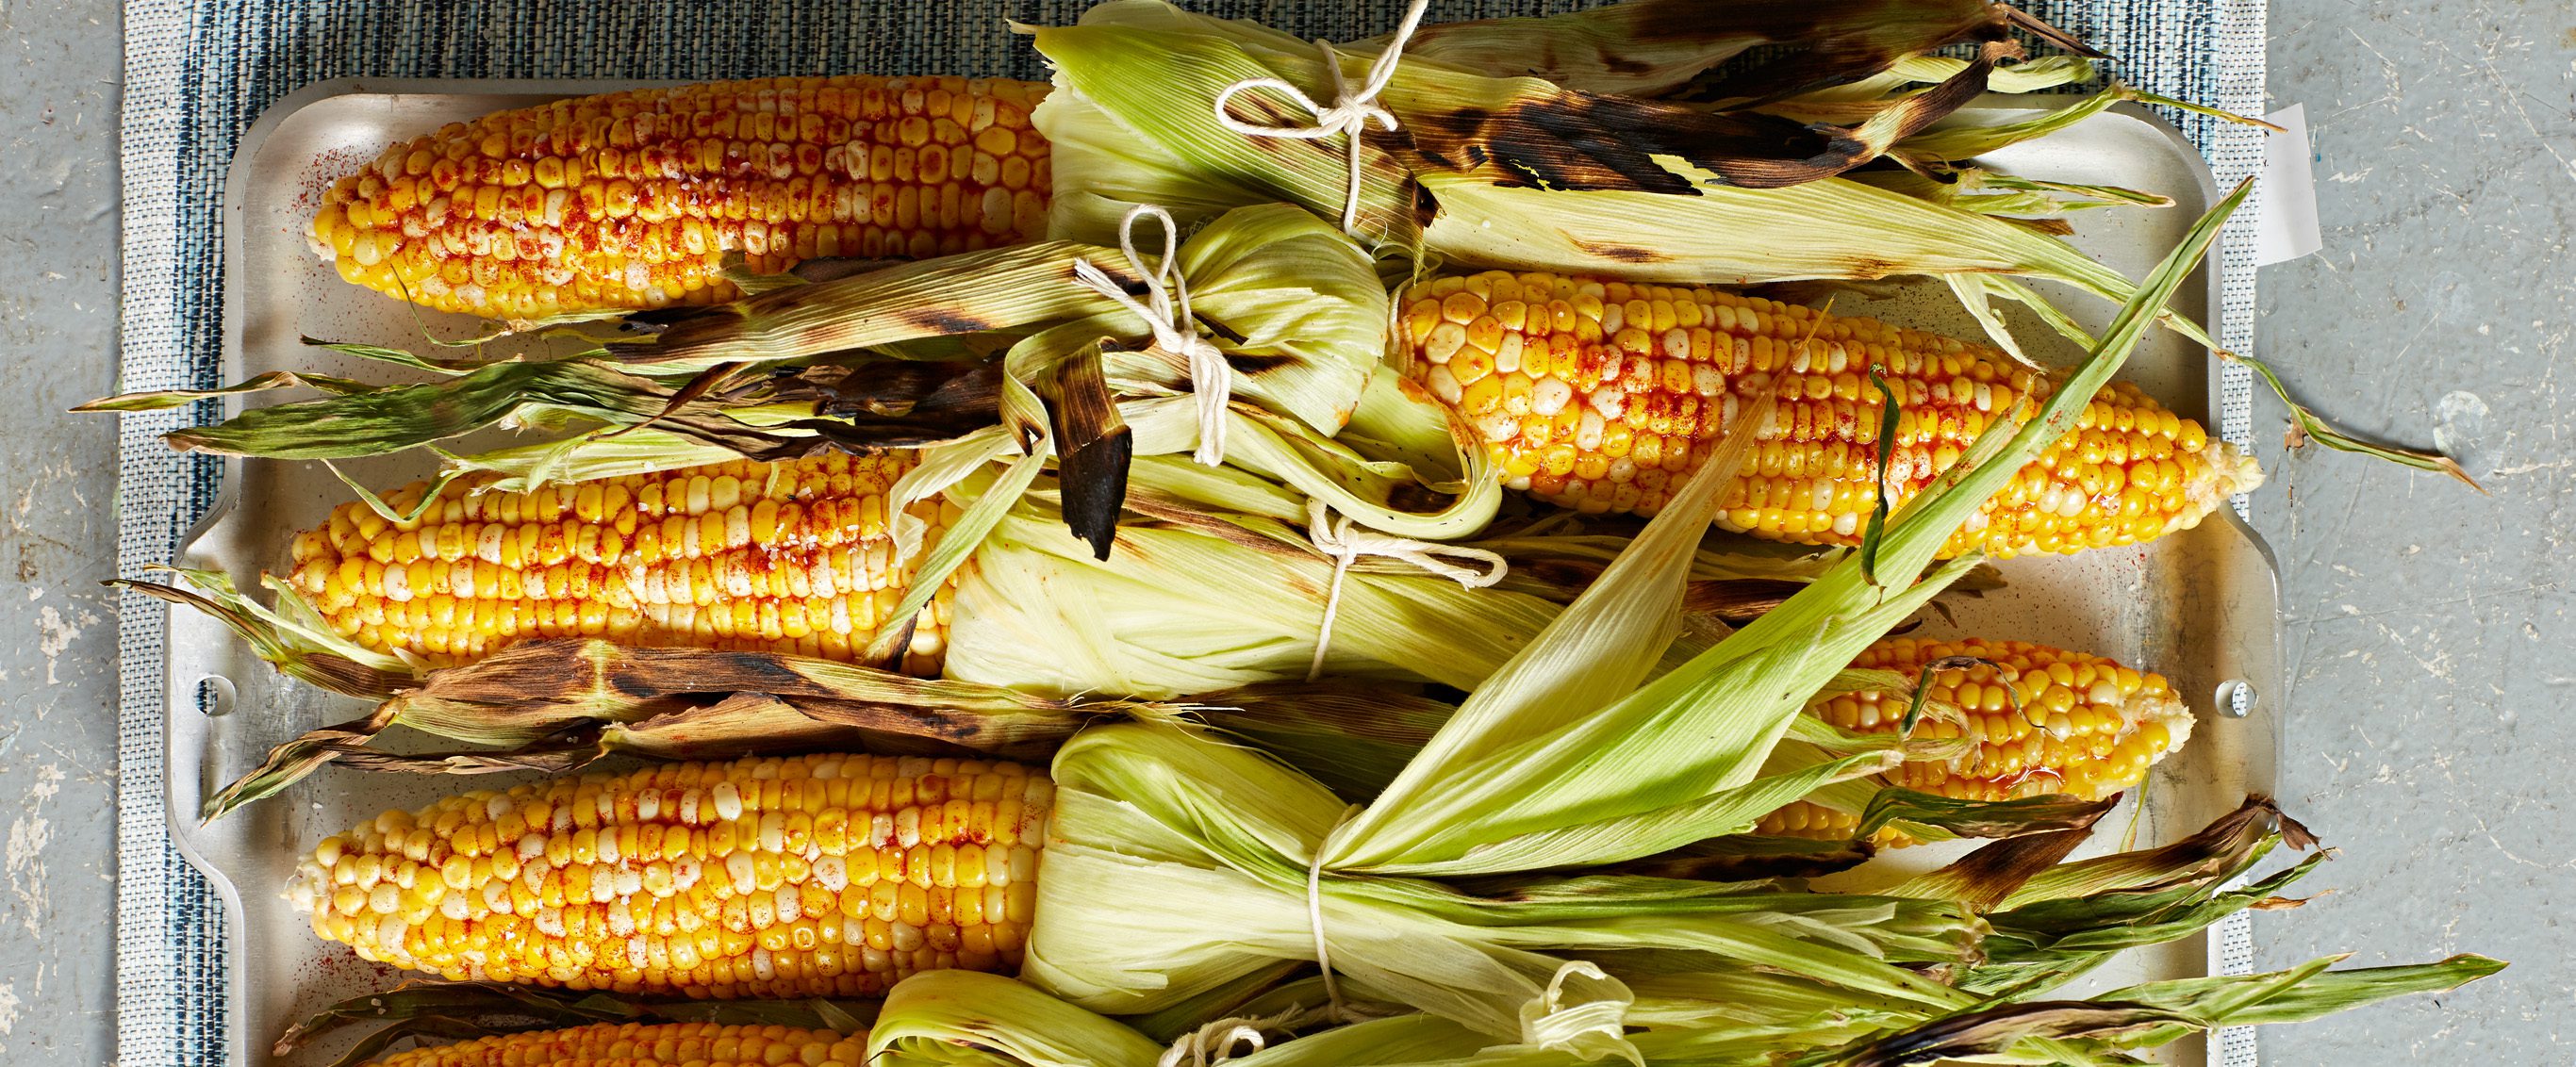 Grilled Corn on the Cob with Chipotle-Lime Rub